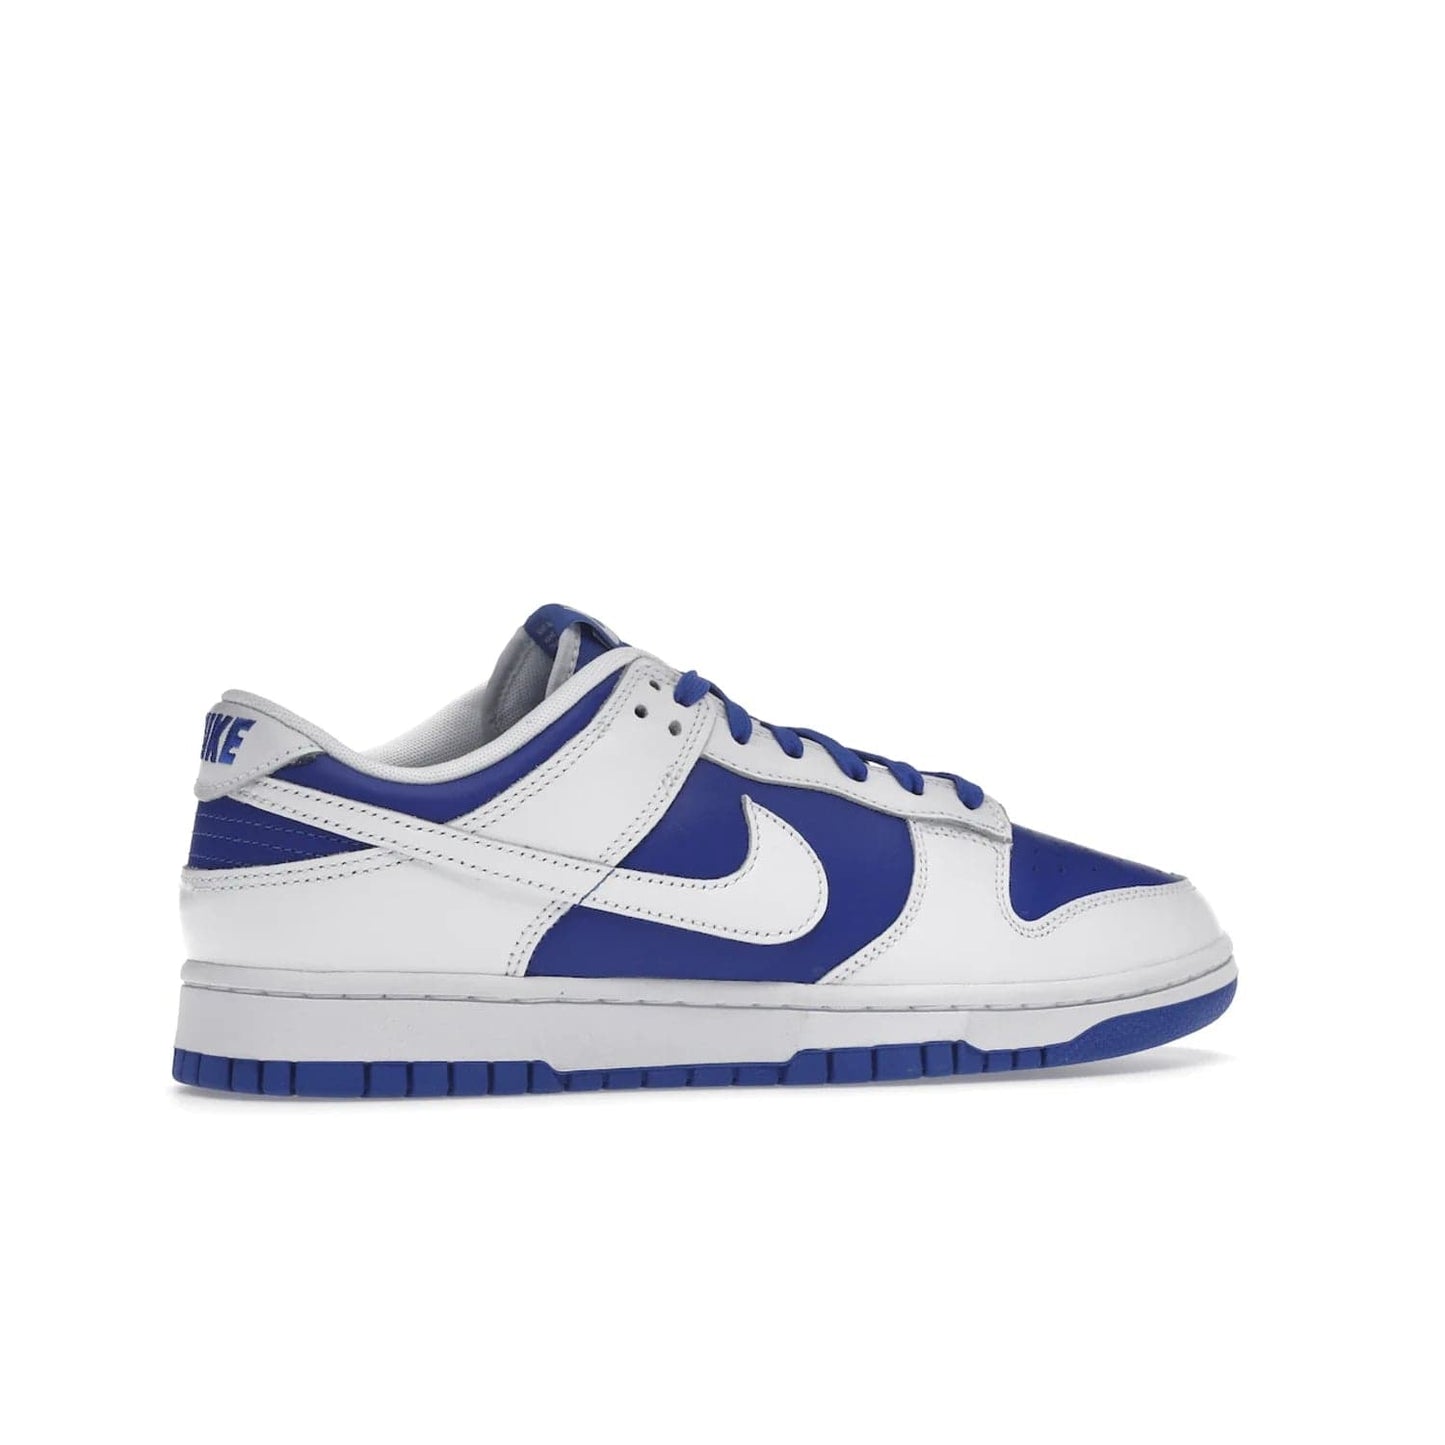 Nike Dunk Low Racer Blue White - Image 35 - Only at www.BallersClubKickz.com - Sleek Racer Blue leather upper and white leather overlays make up the Nike Dunk Low Racer Blue White. Woven tag and heel embroidery for a 1985 Dunk look with a matching EVA foam sole completes the classic colorway.